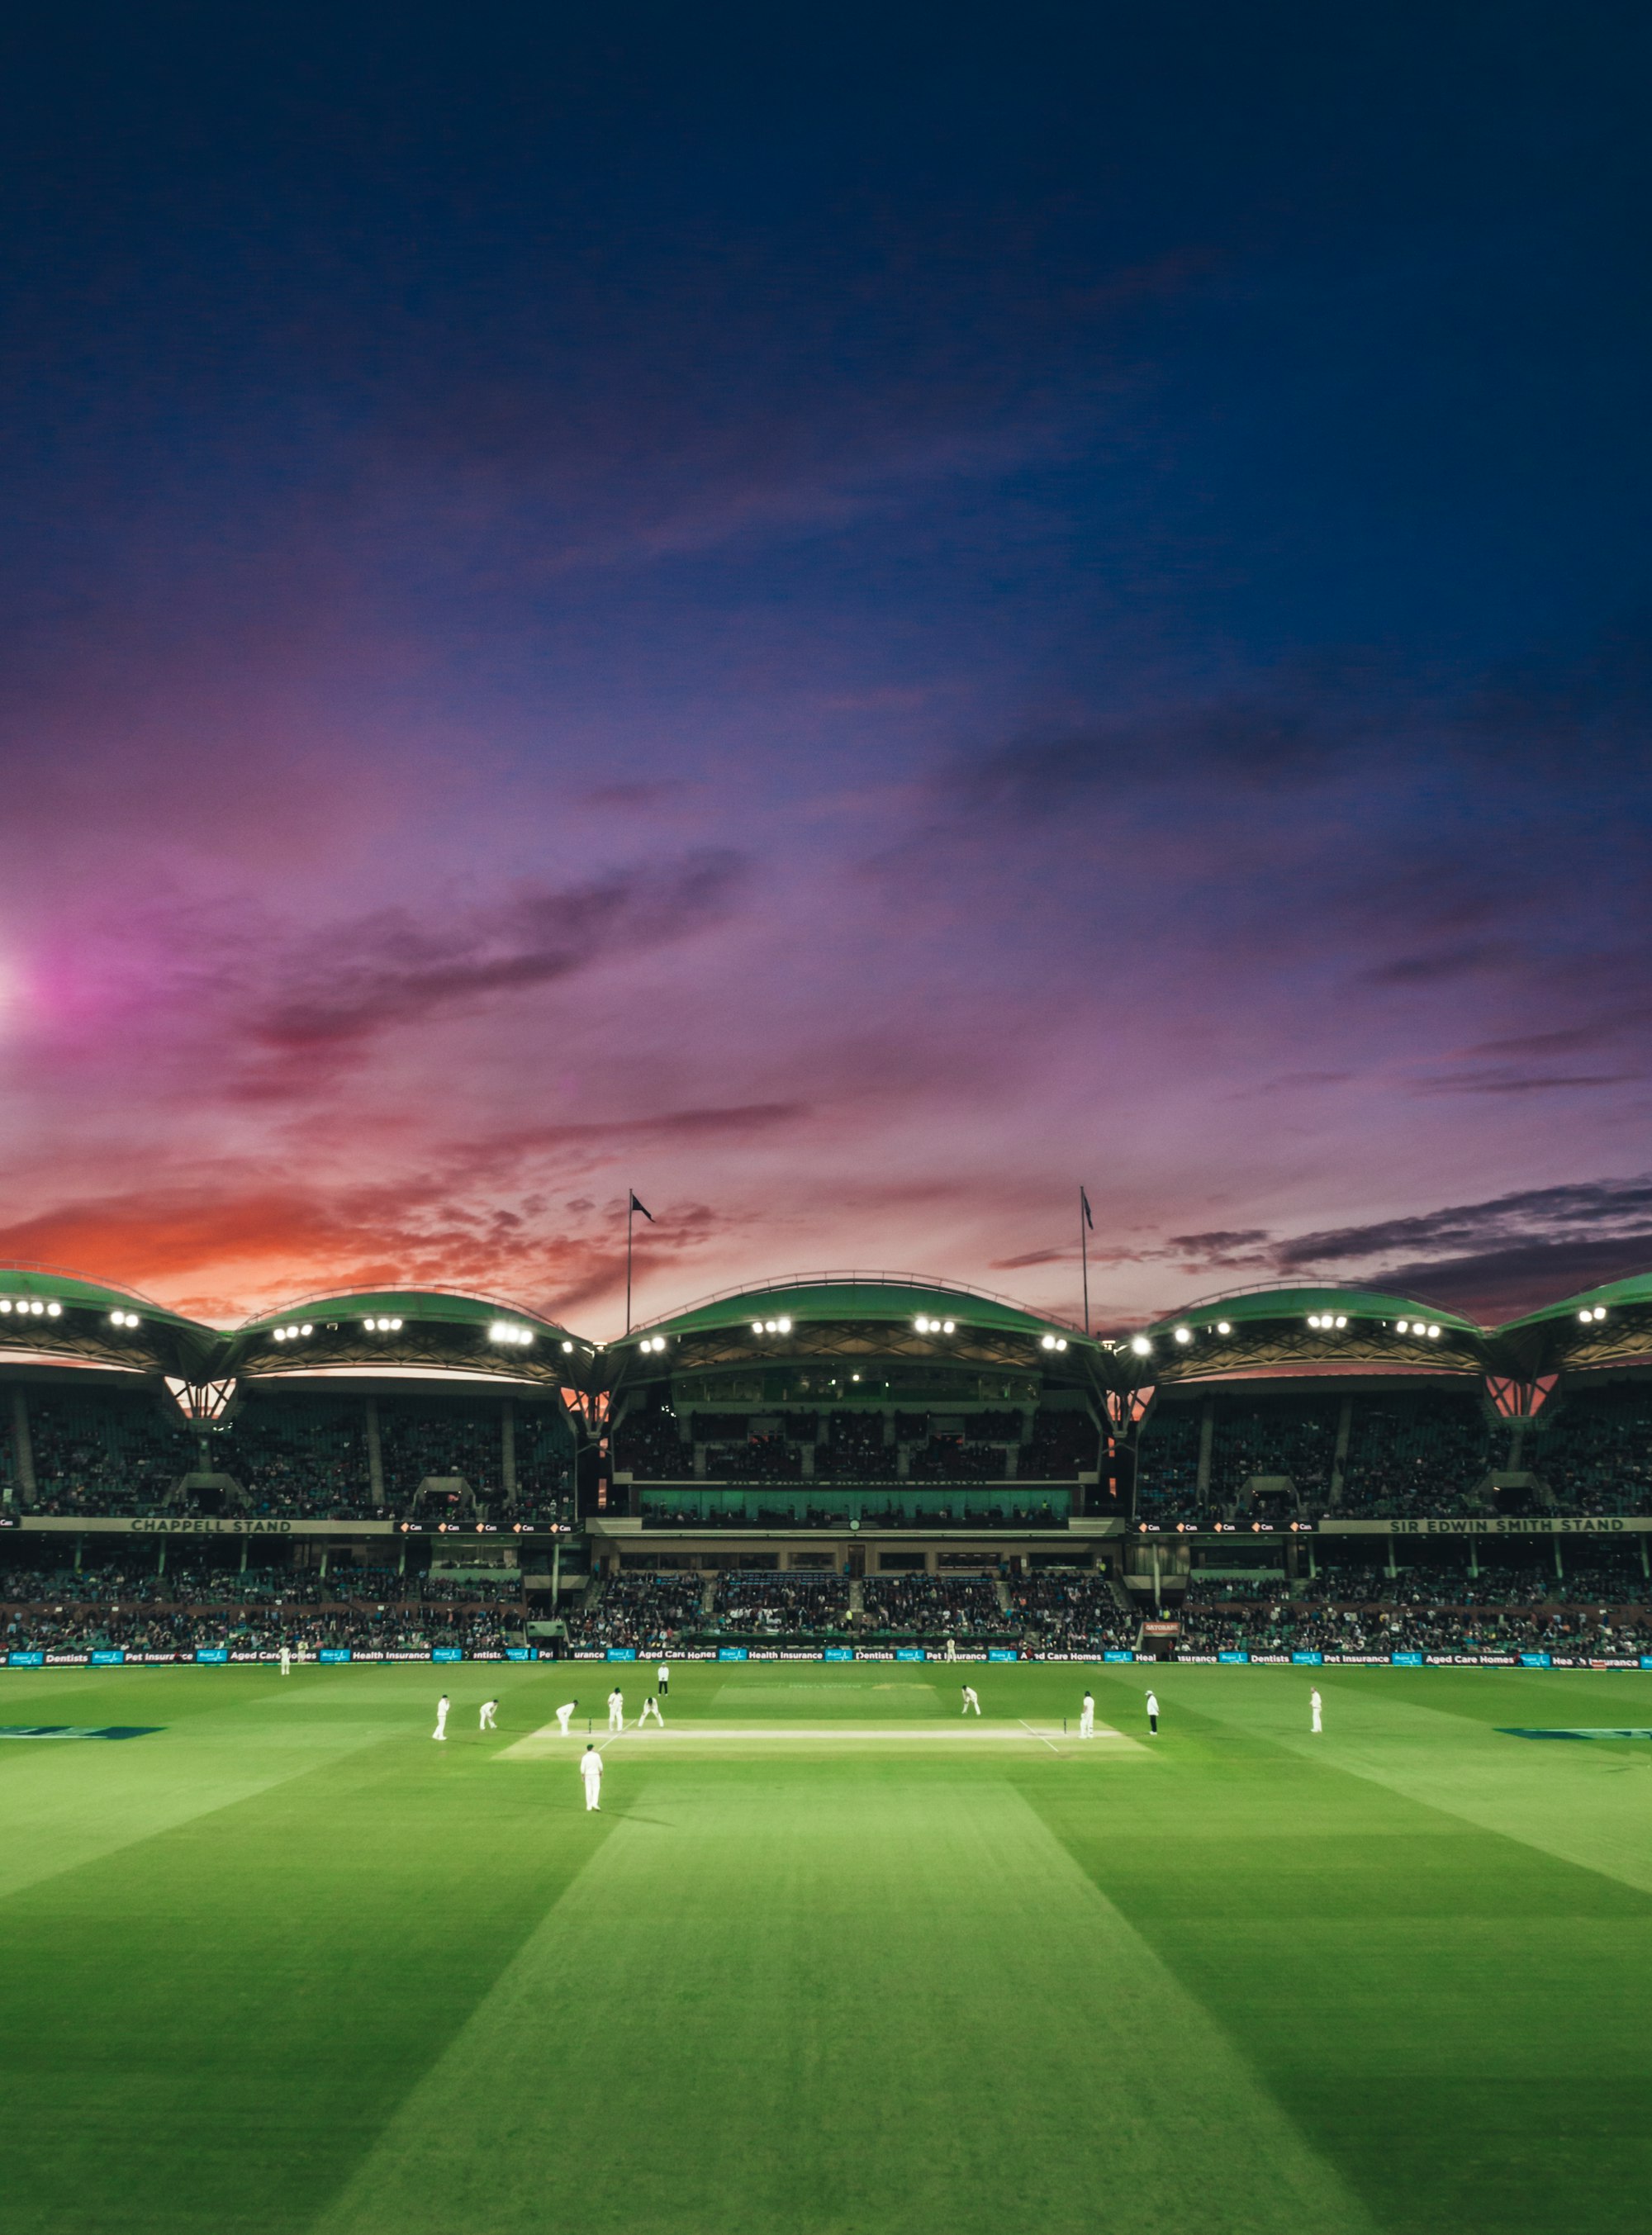 As the sun sets, so does the test match between England and Australia. Adelaide Oval, South Australia.